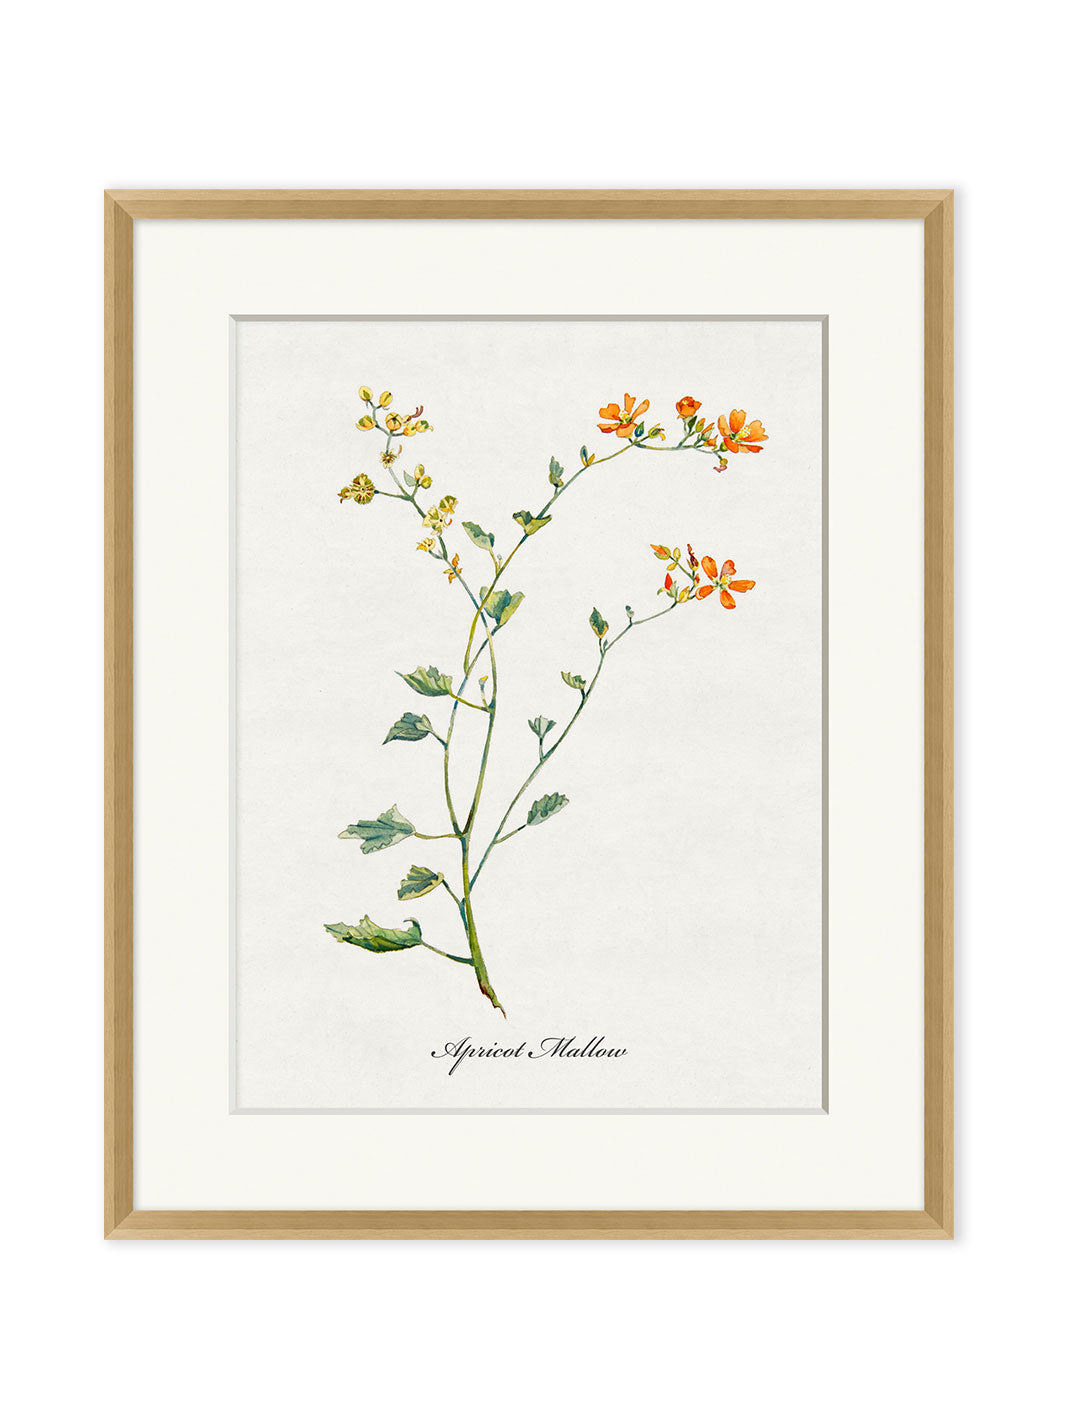 'Valley Wildflower Apricot Mallow' by Nathan Turner Framed Art